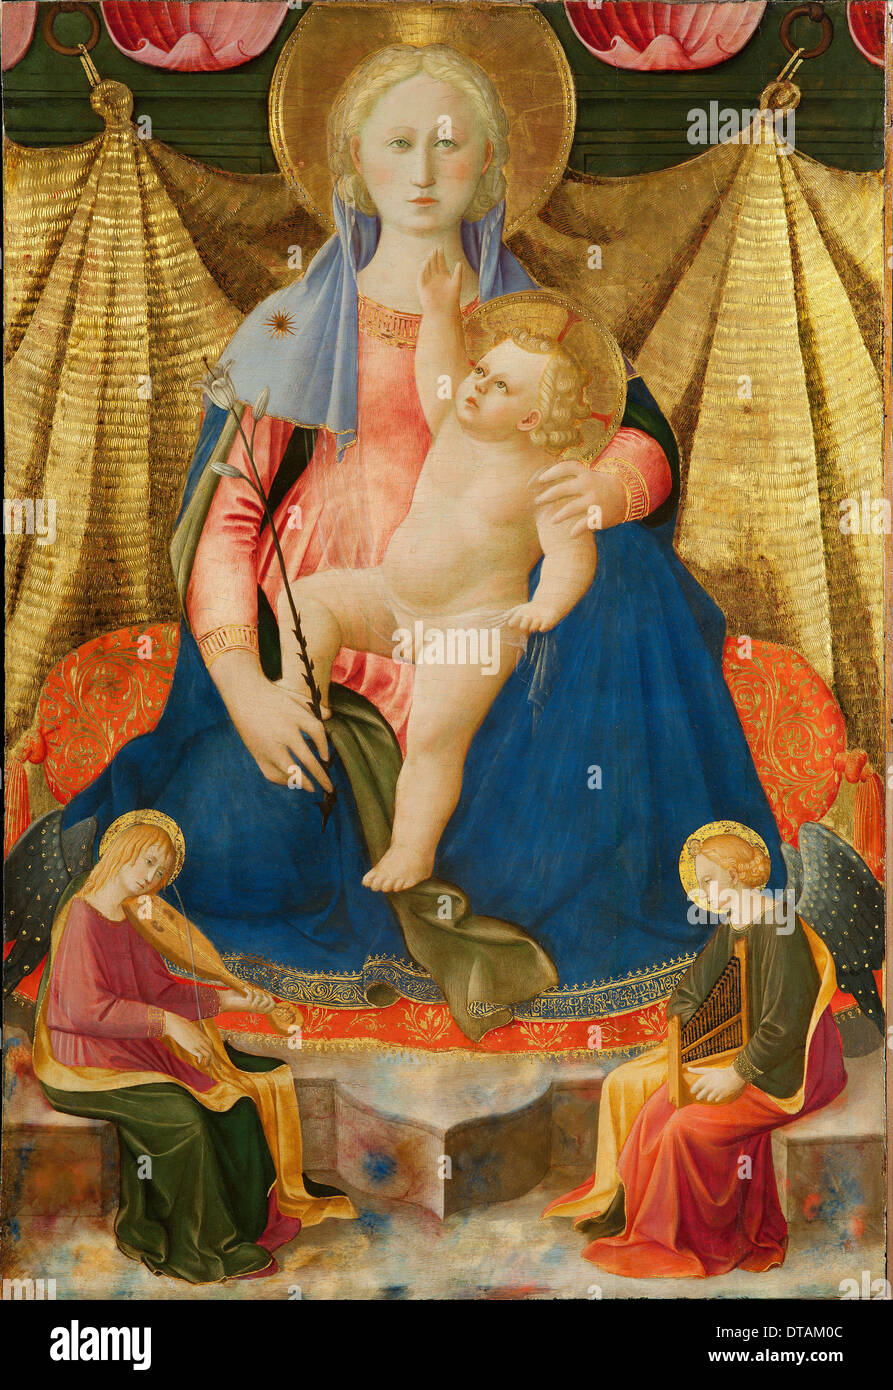 Madonna of Humility with Two Musician Angels, c. 1450. Artist: Strozzi, Zanobi (1412-1468) Stock Photo